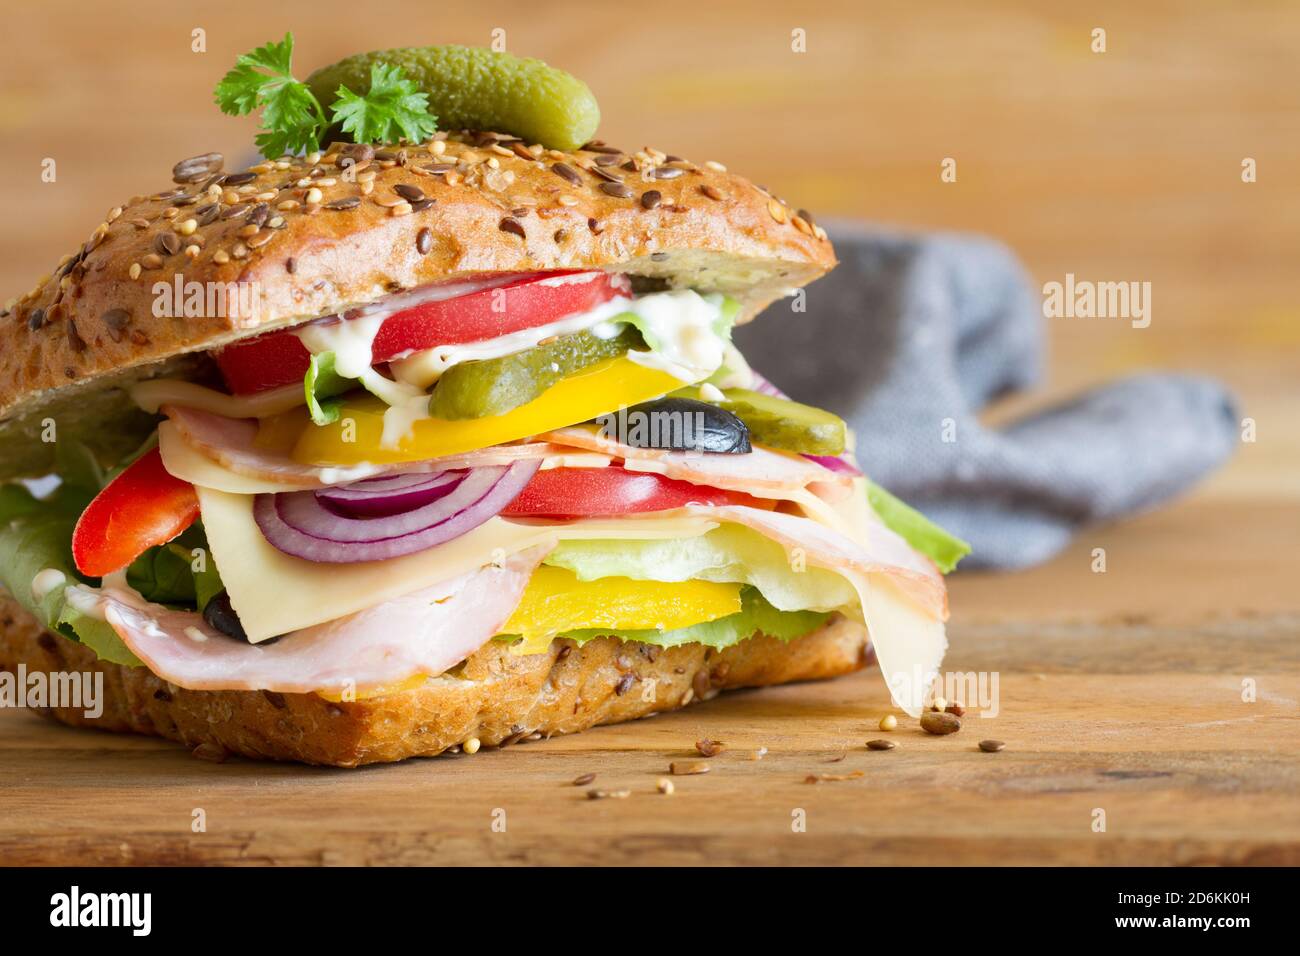 Appetizing sandwich with cured meat, cheese and vegetables on wooden background Stock Photo